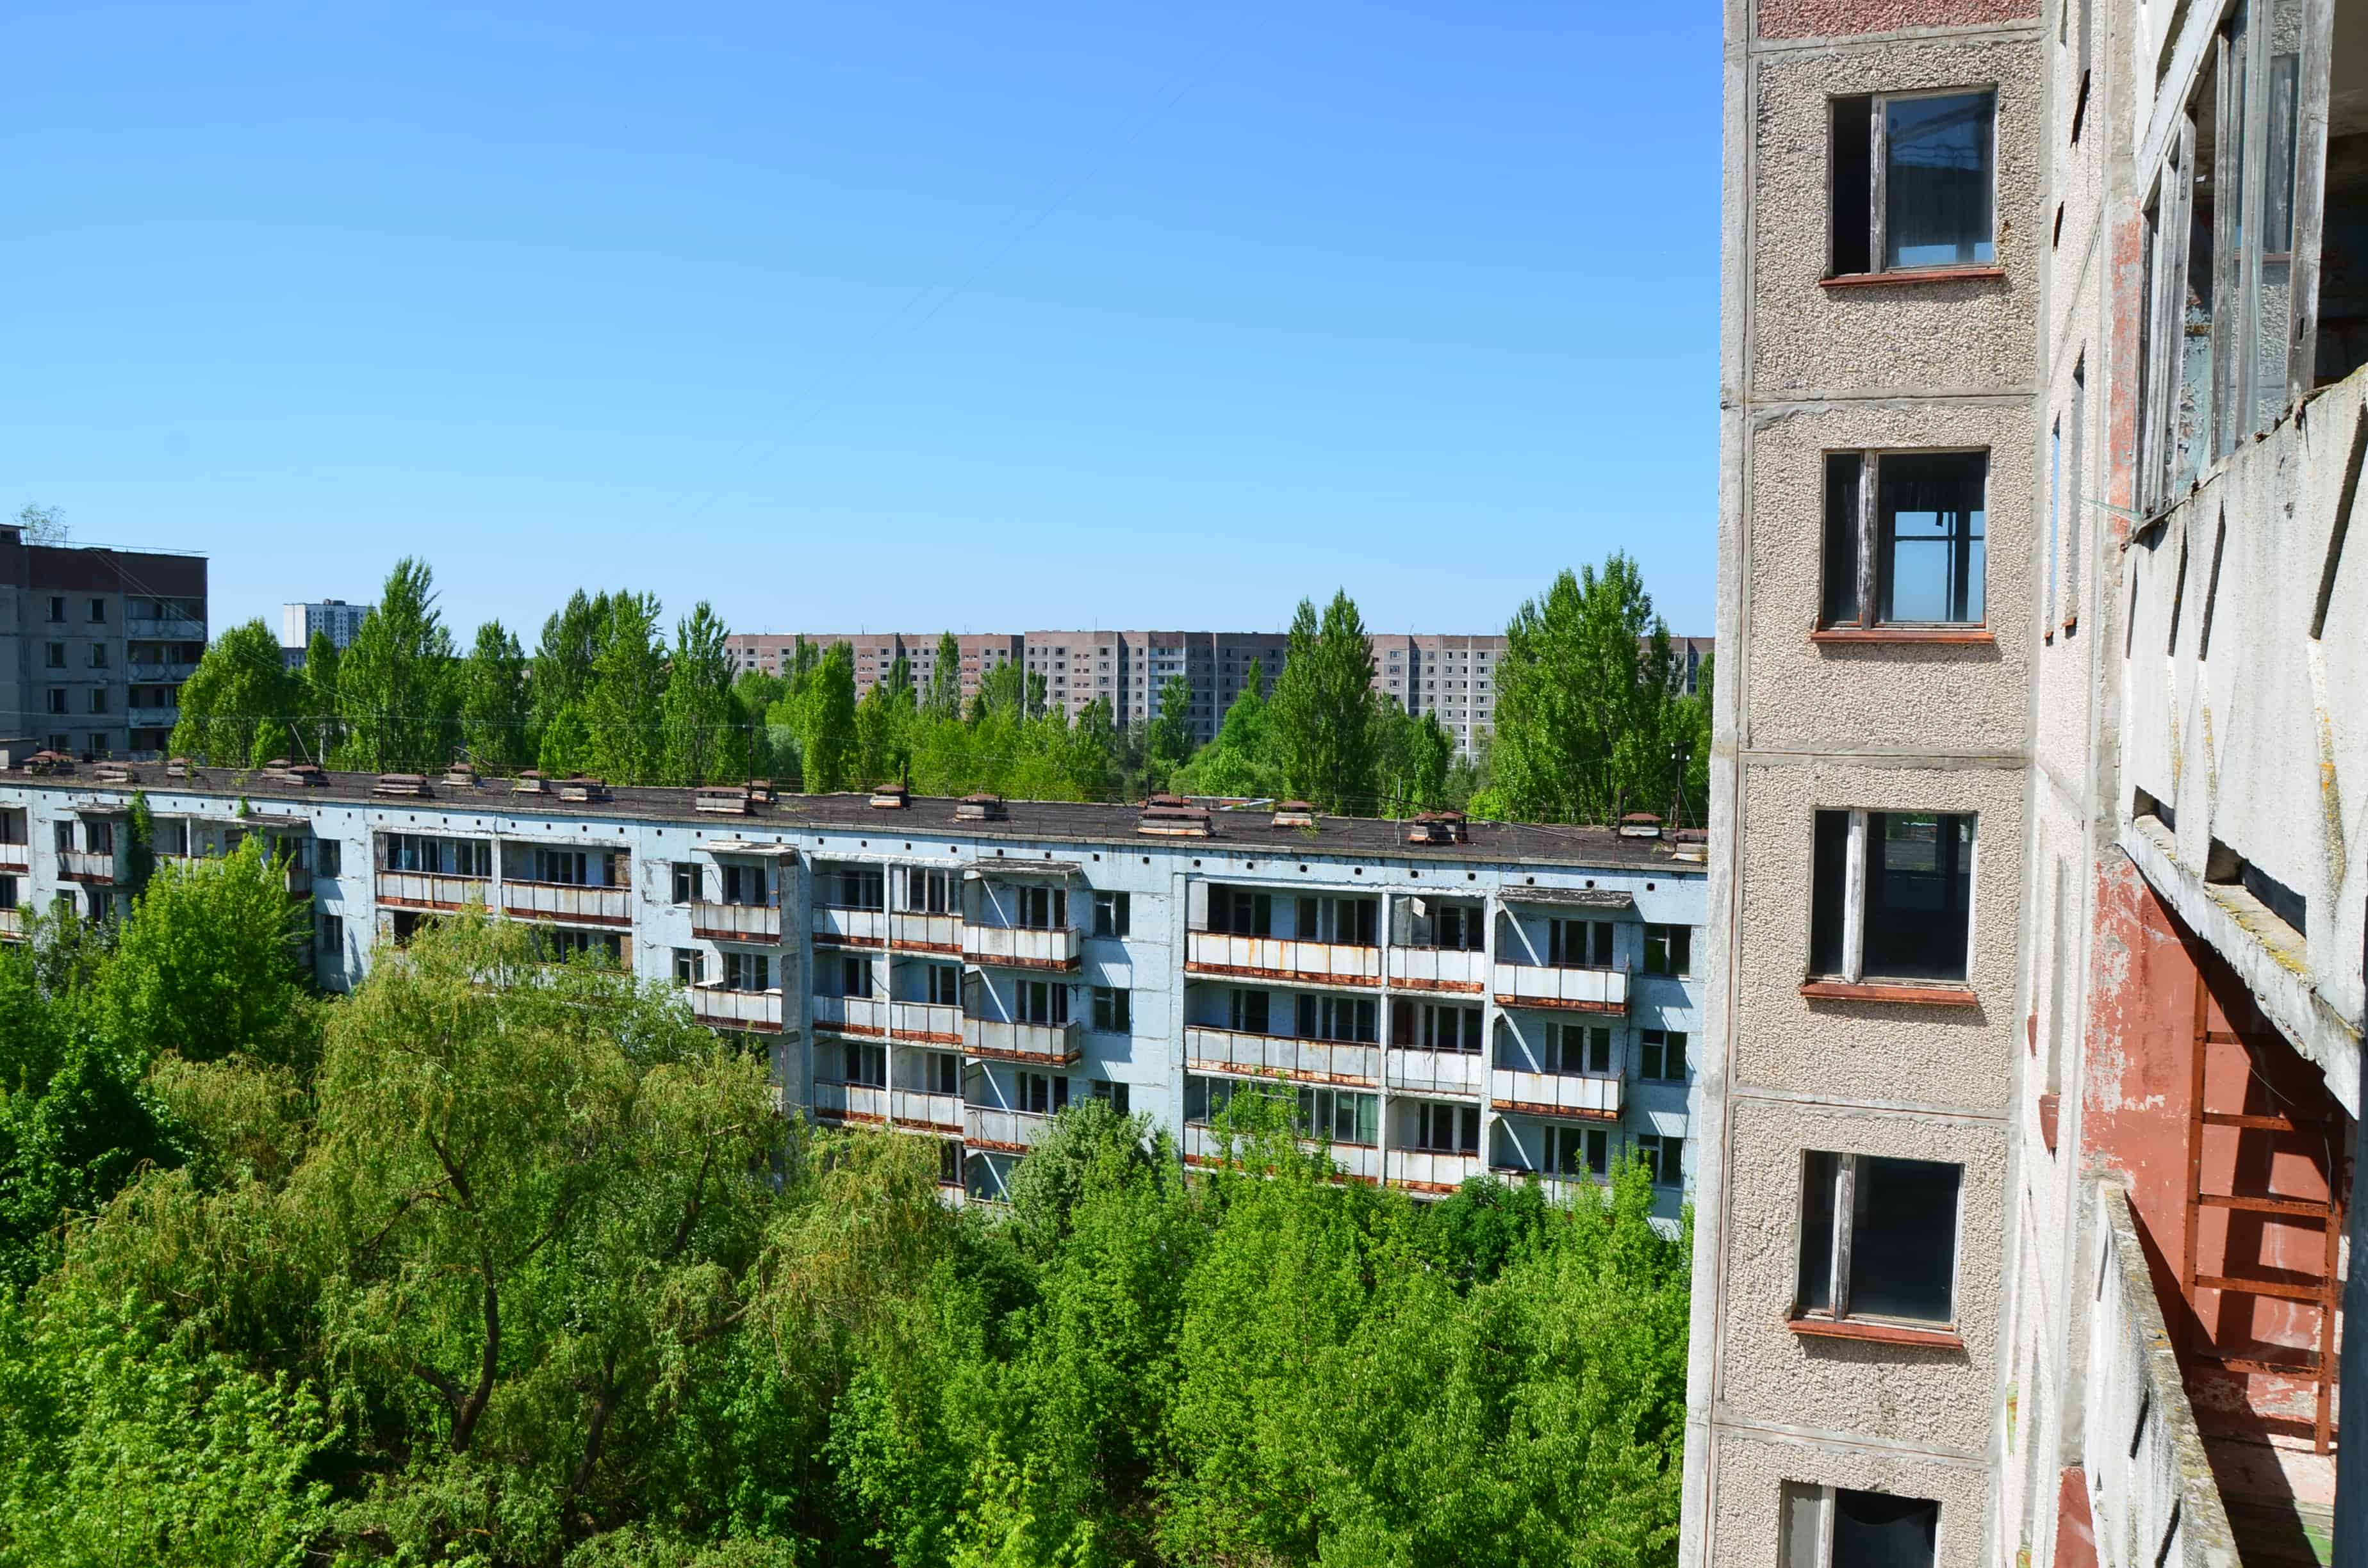 Looking out a window at 17 Sportivnaya Street in Pripyat, Chernobyl Exclusion Zone, Ukraine